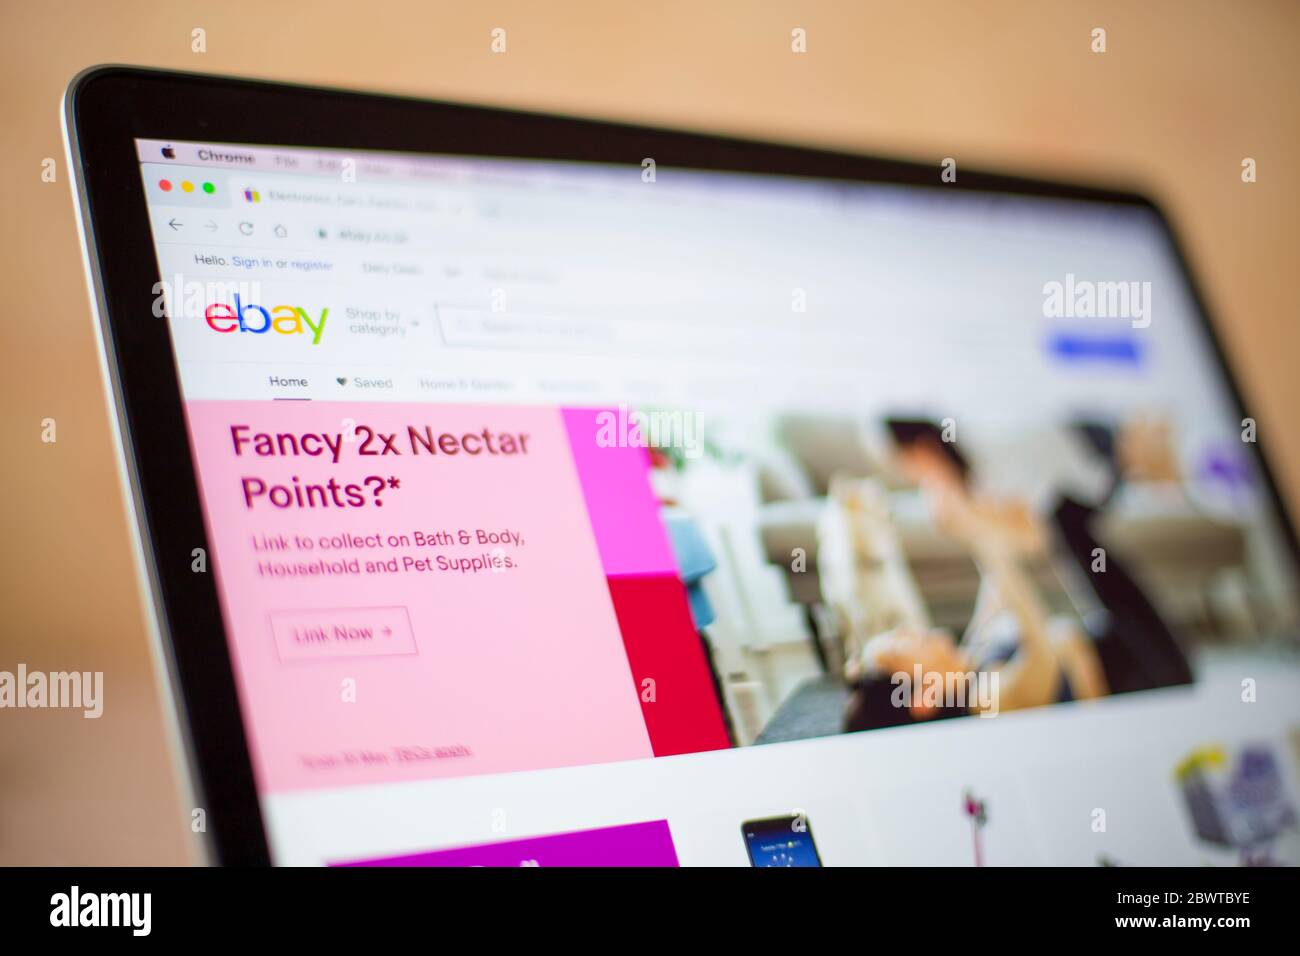 BELGRADE, SERBIA - MARCH 9, 2020: eBay web site on computer screen. eBay  is an American multinational e-commerce corporation founded at 1995. Stock Photo